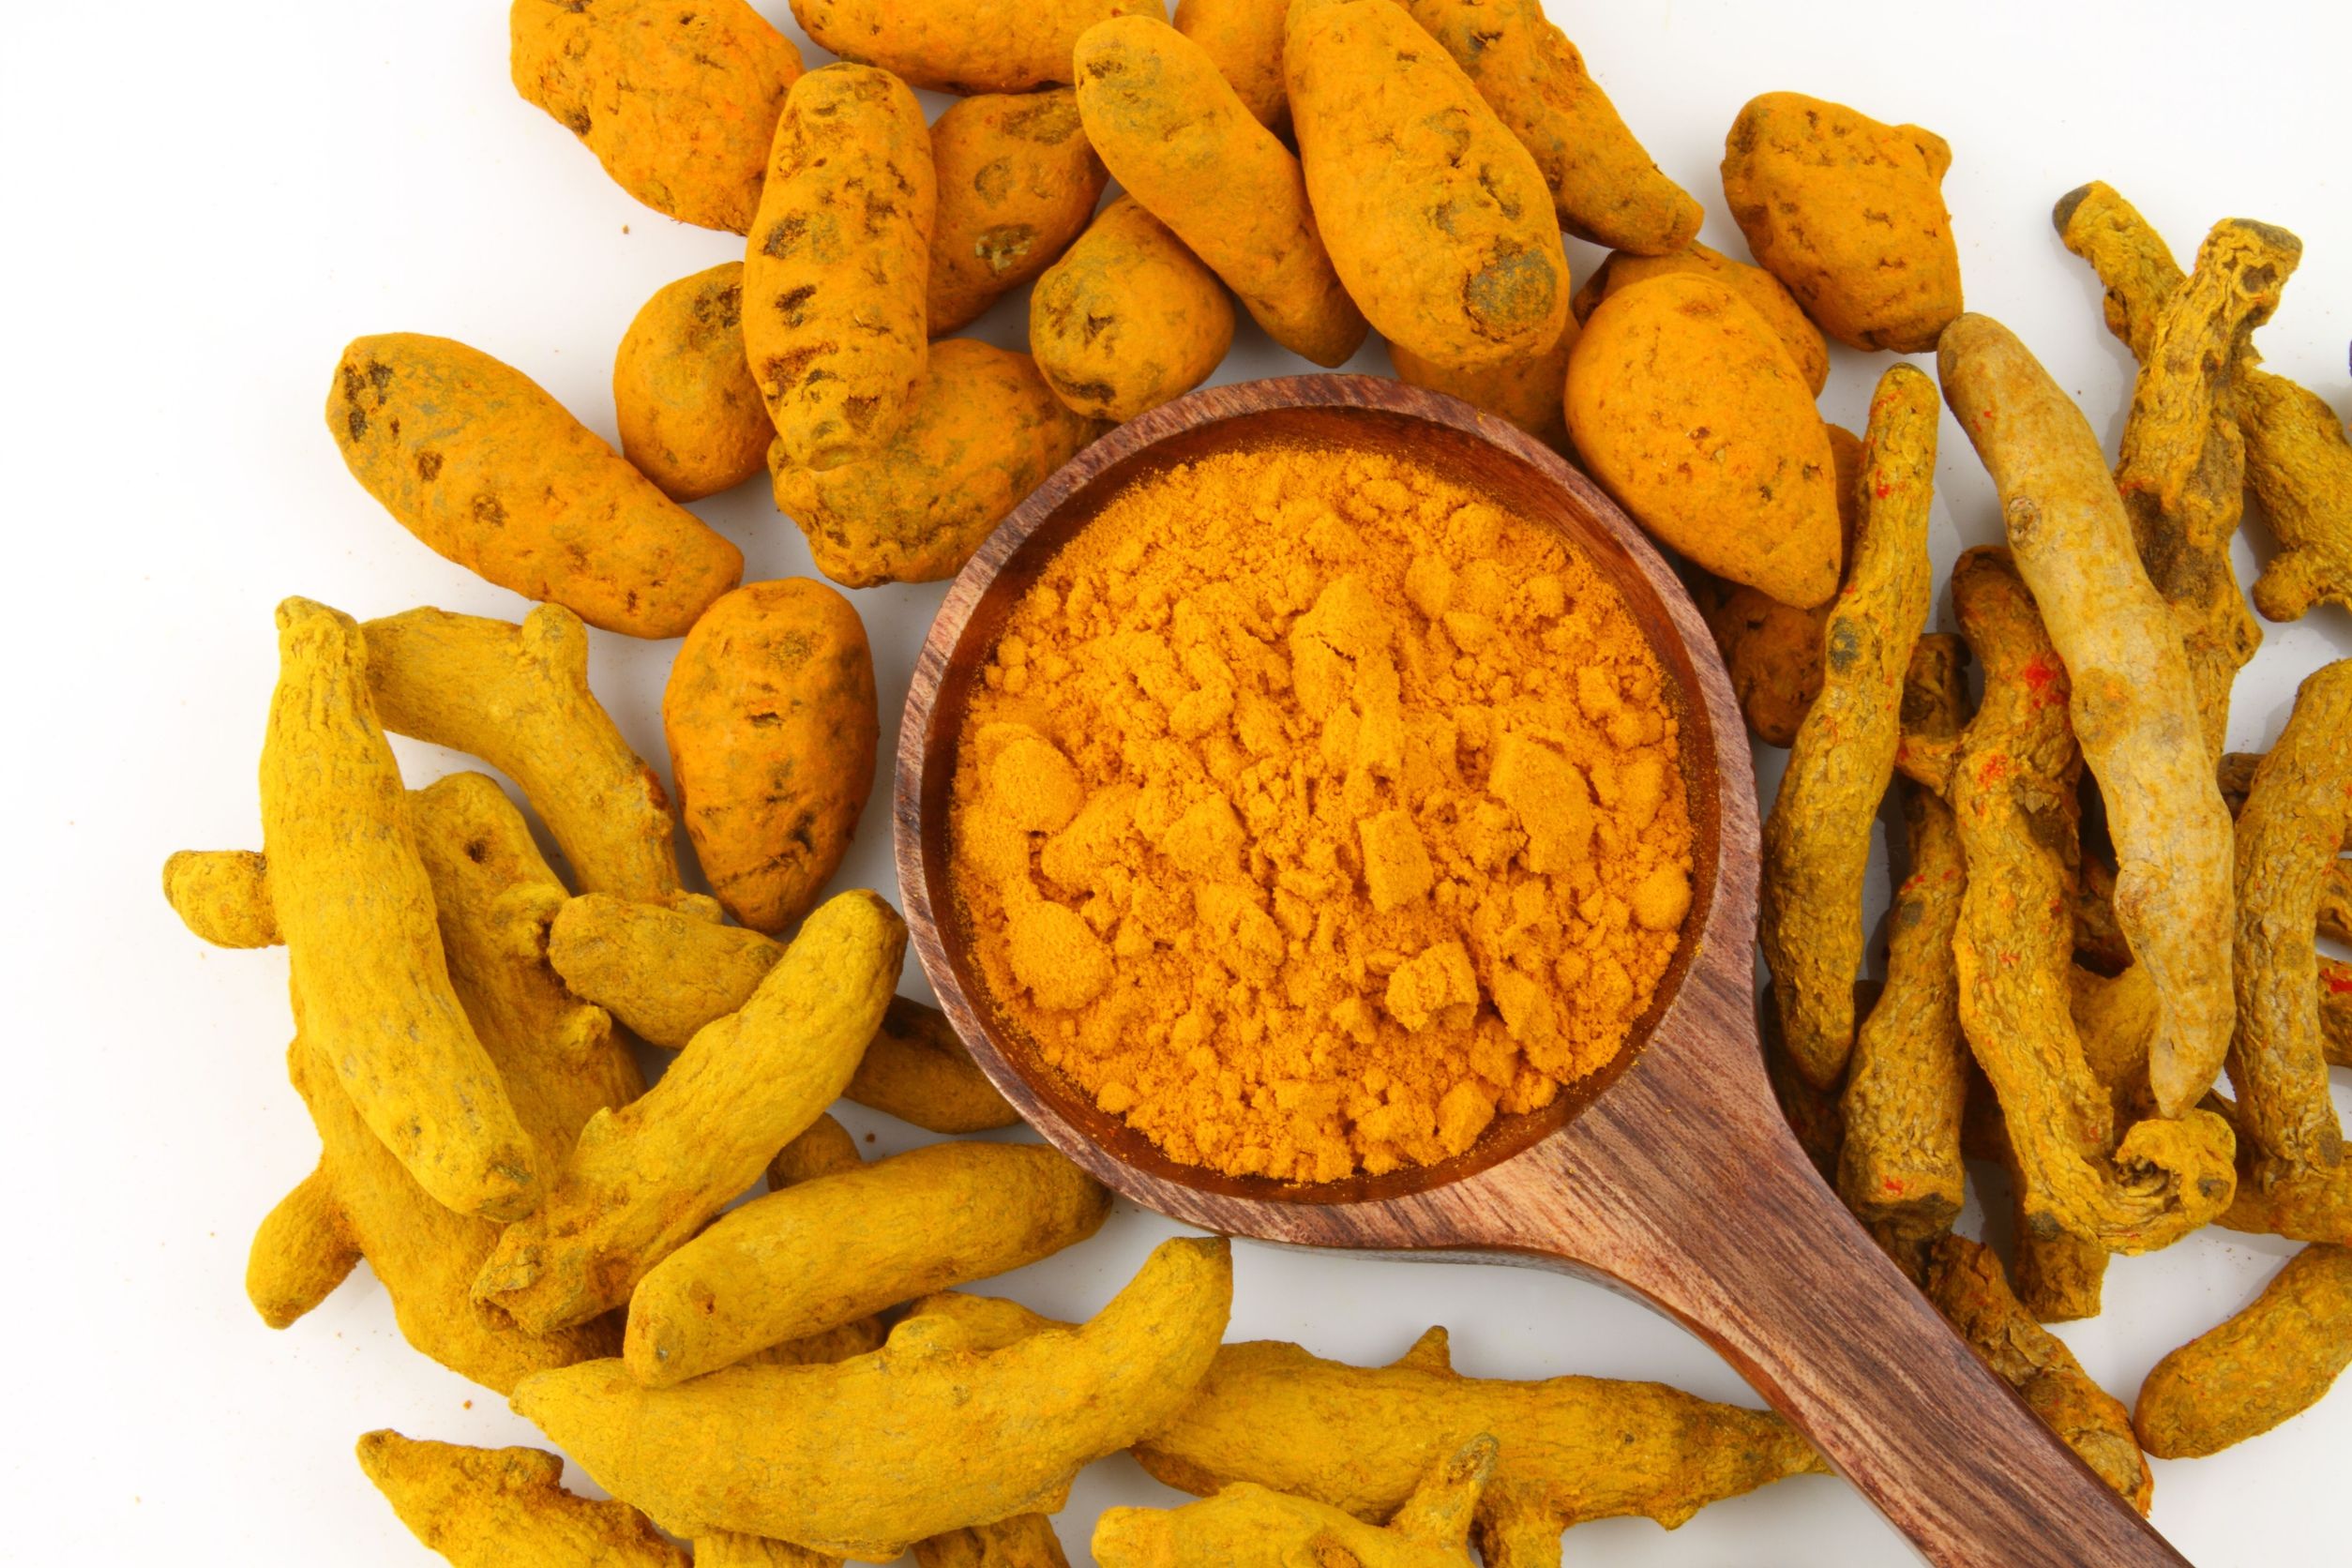 How Should You Take Turmeric For Arthritis Pain? Here’s All You Need To Know